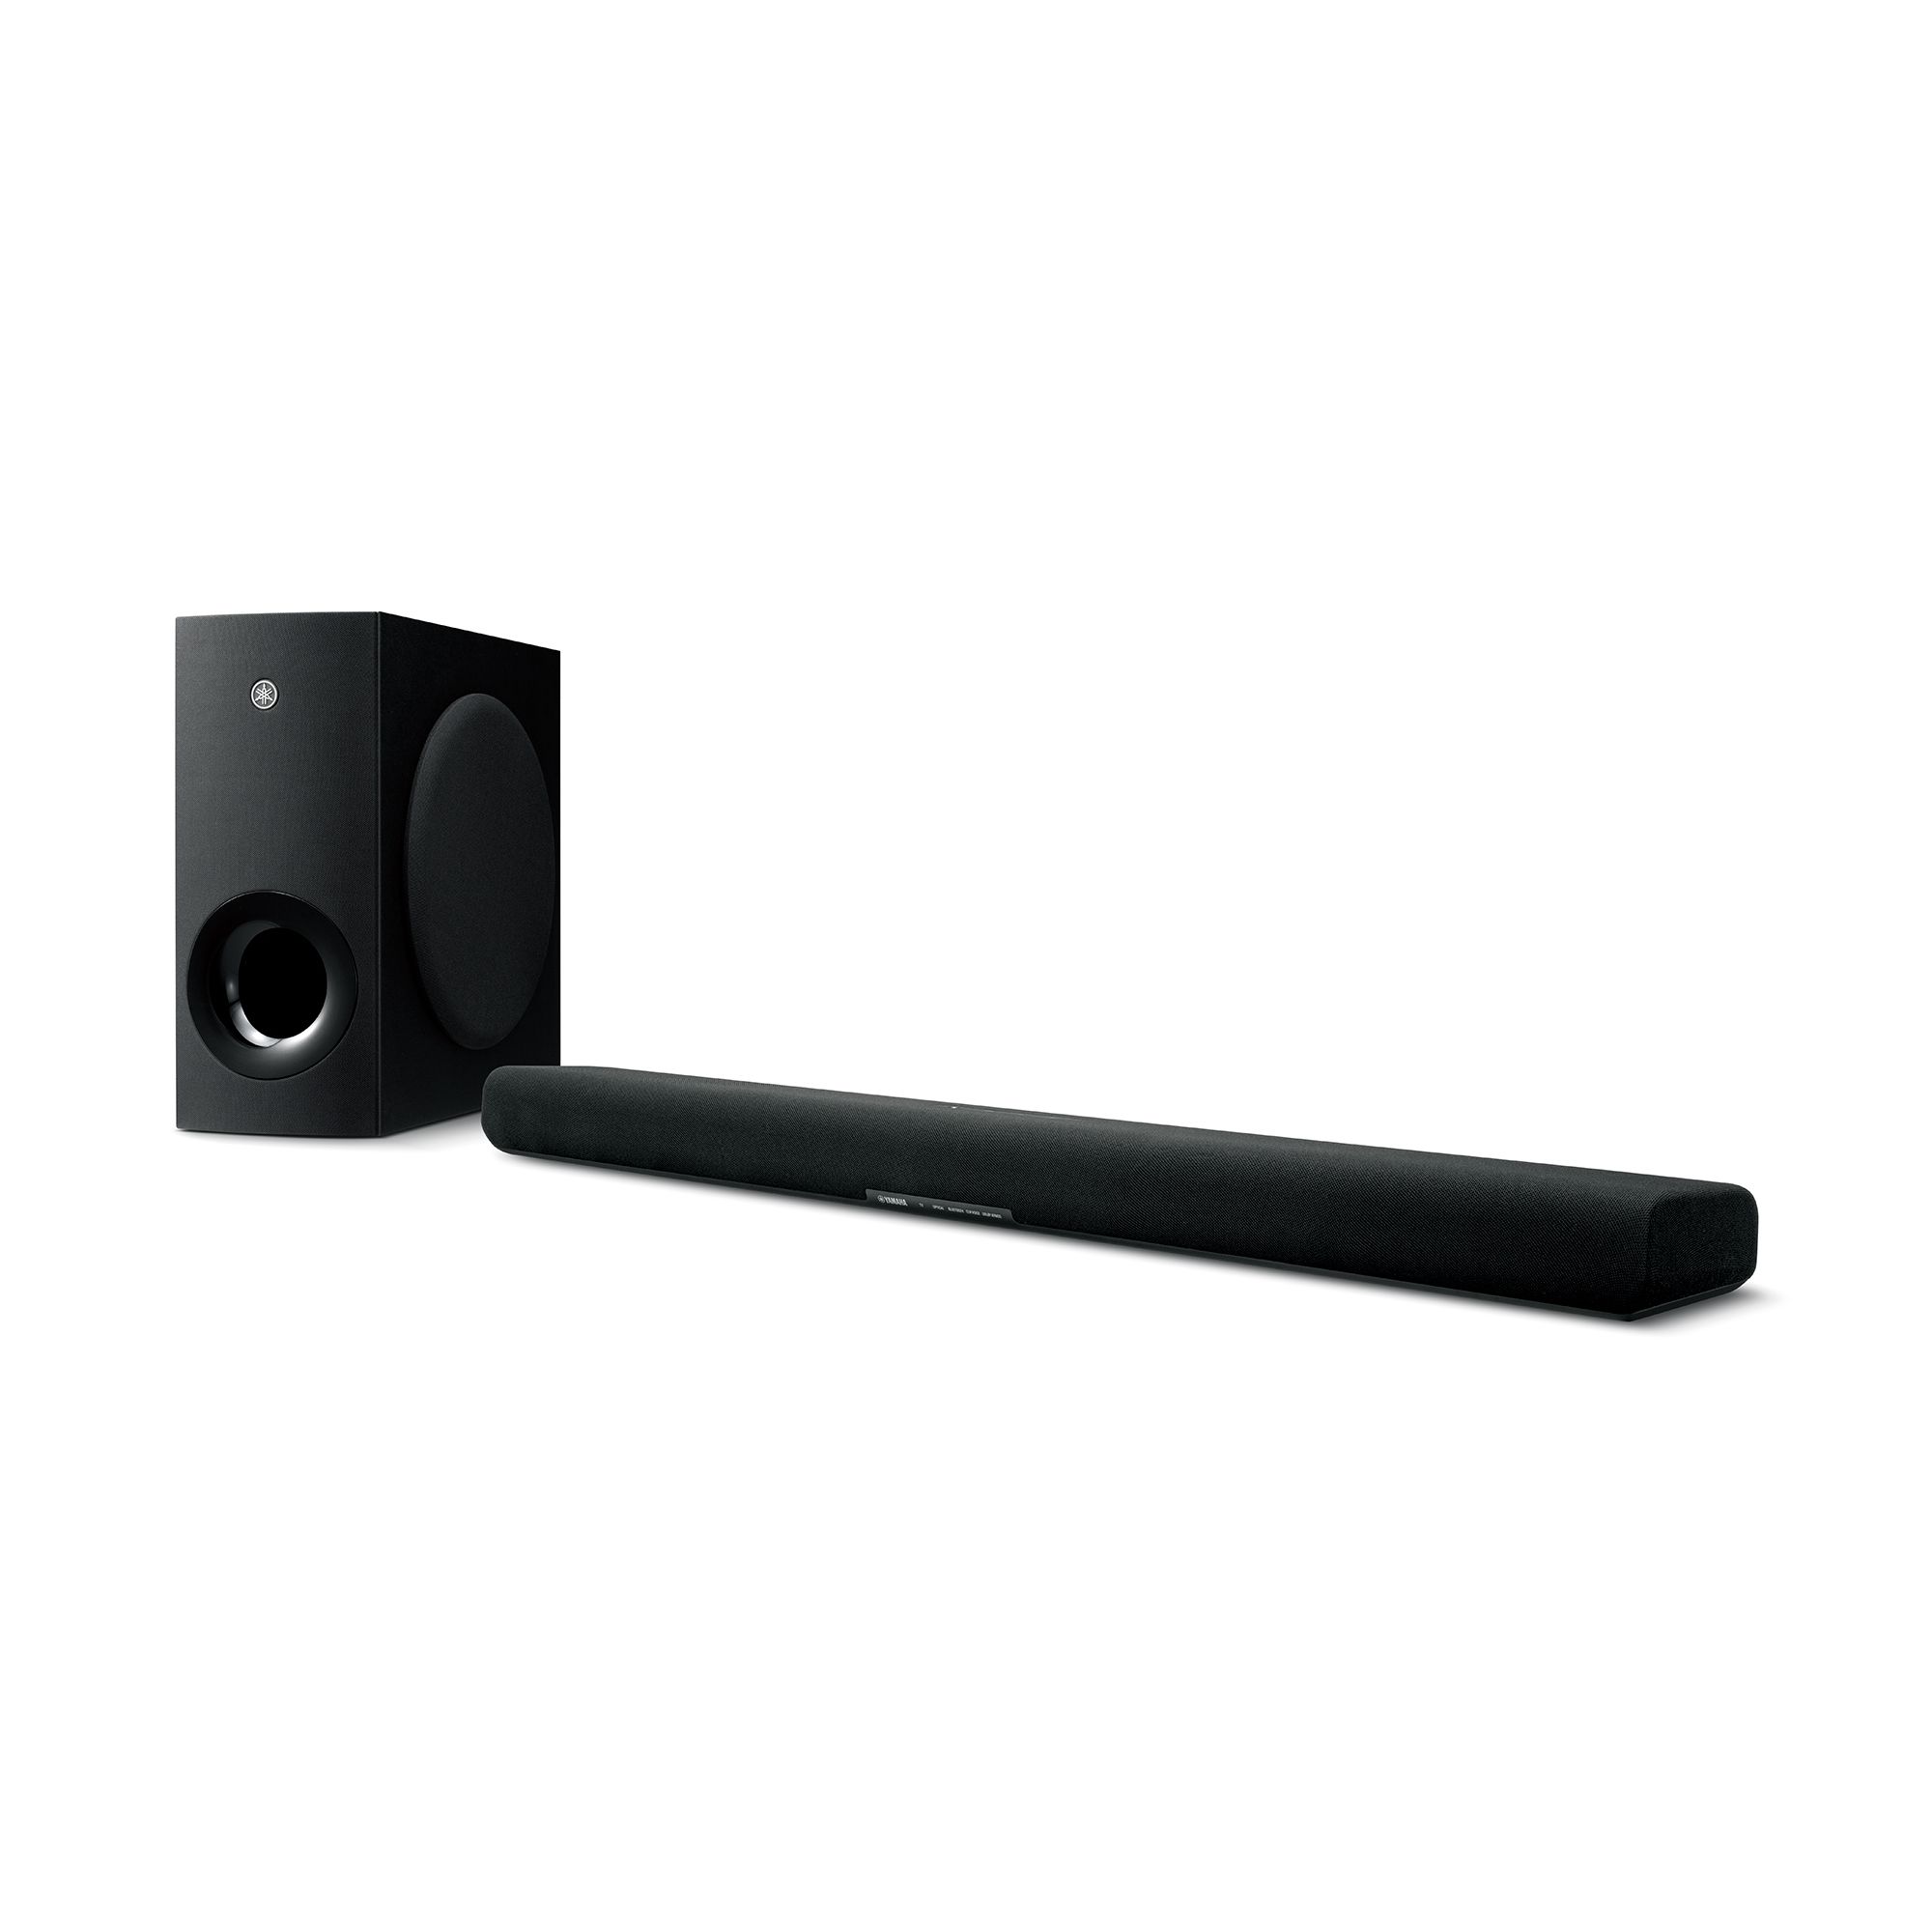 SR-C20A - Overview - Sound Bar - Audio & Visual - Products 